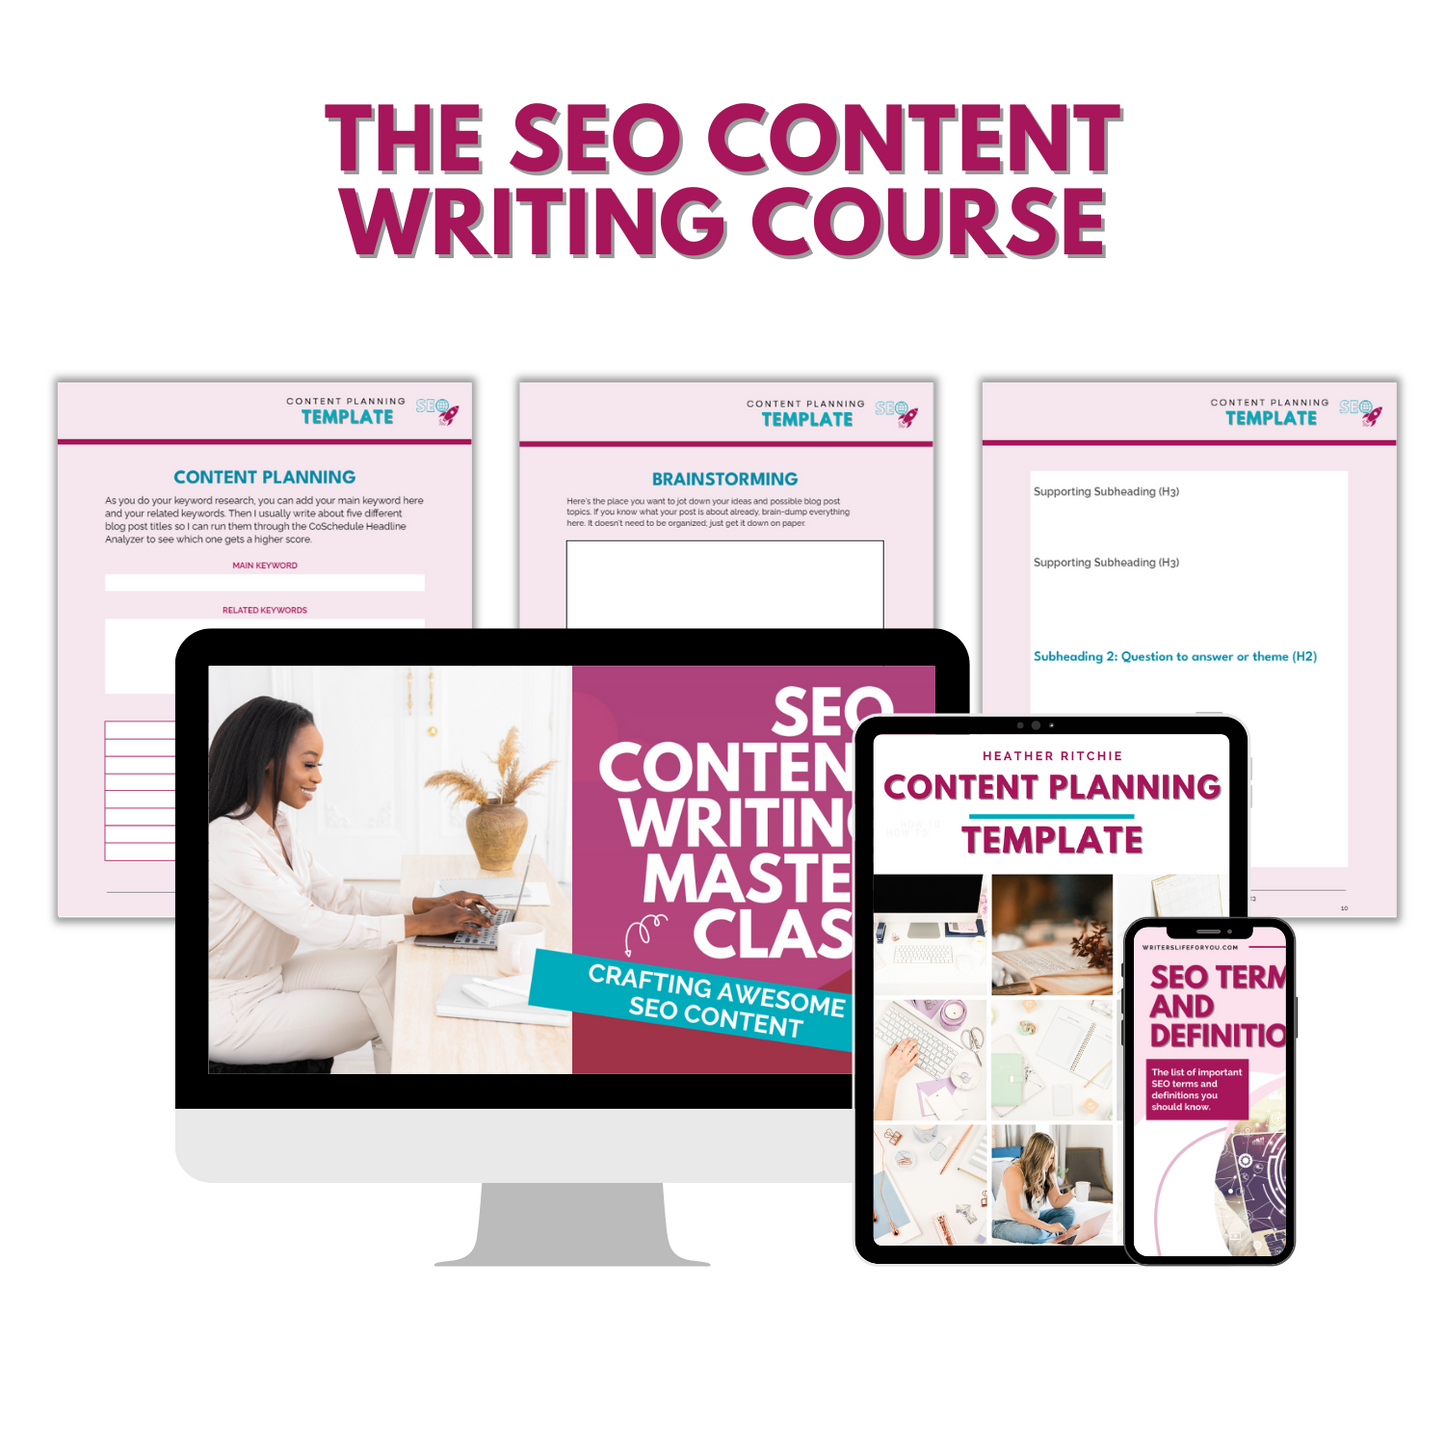 The SEO Content Writing Course